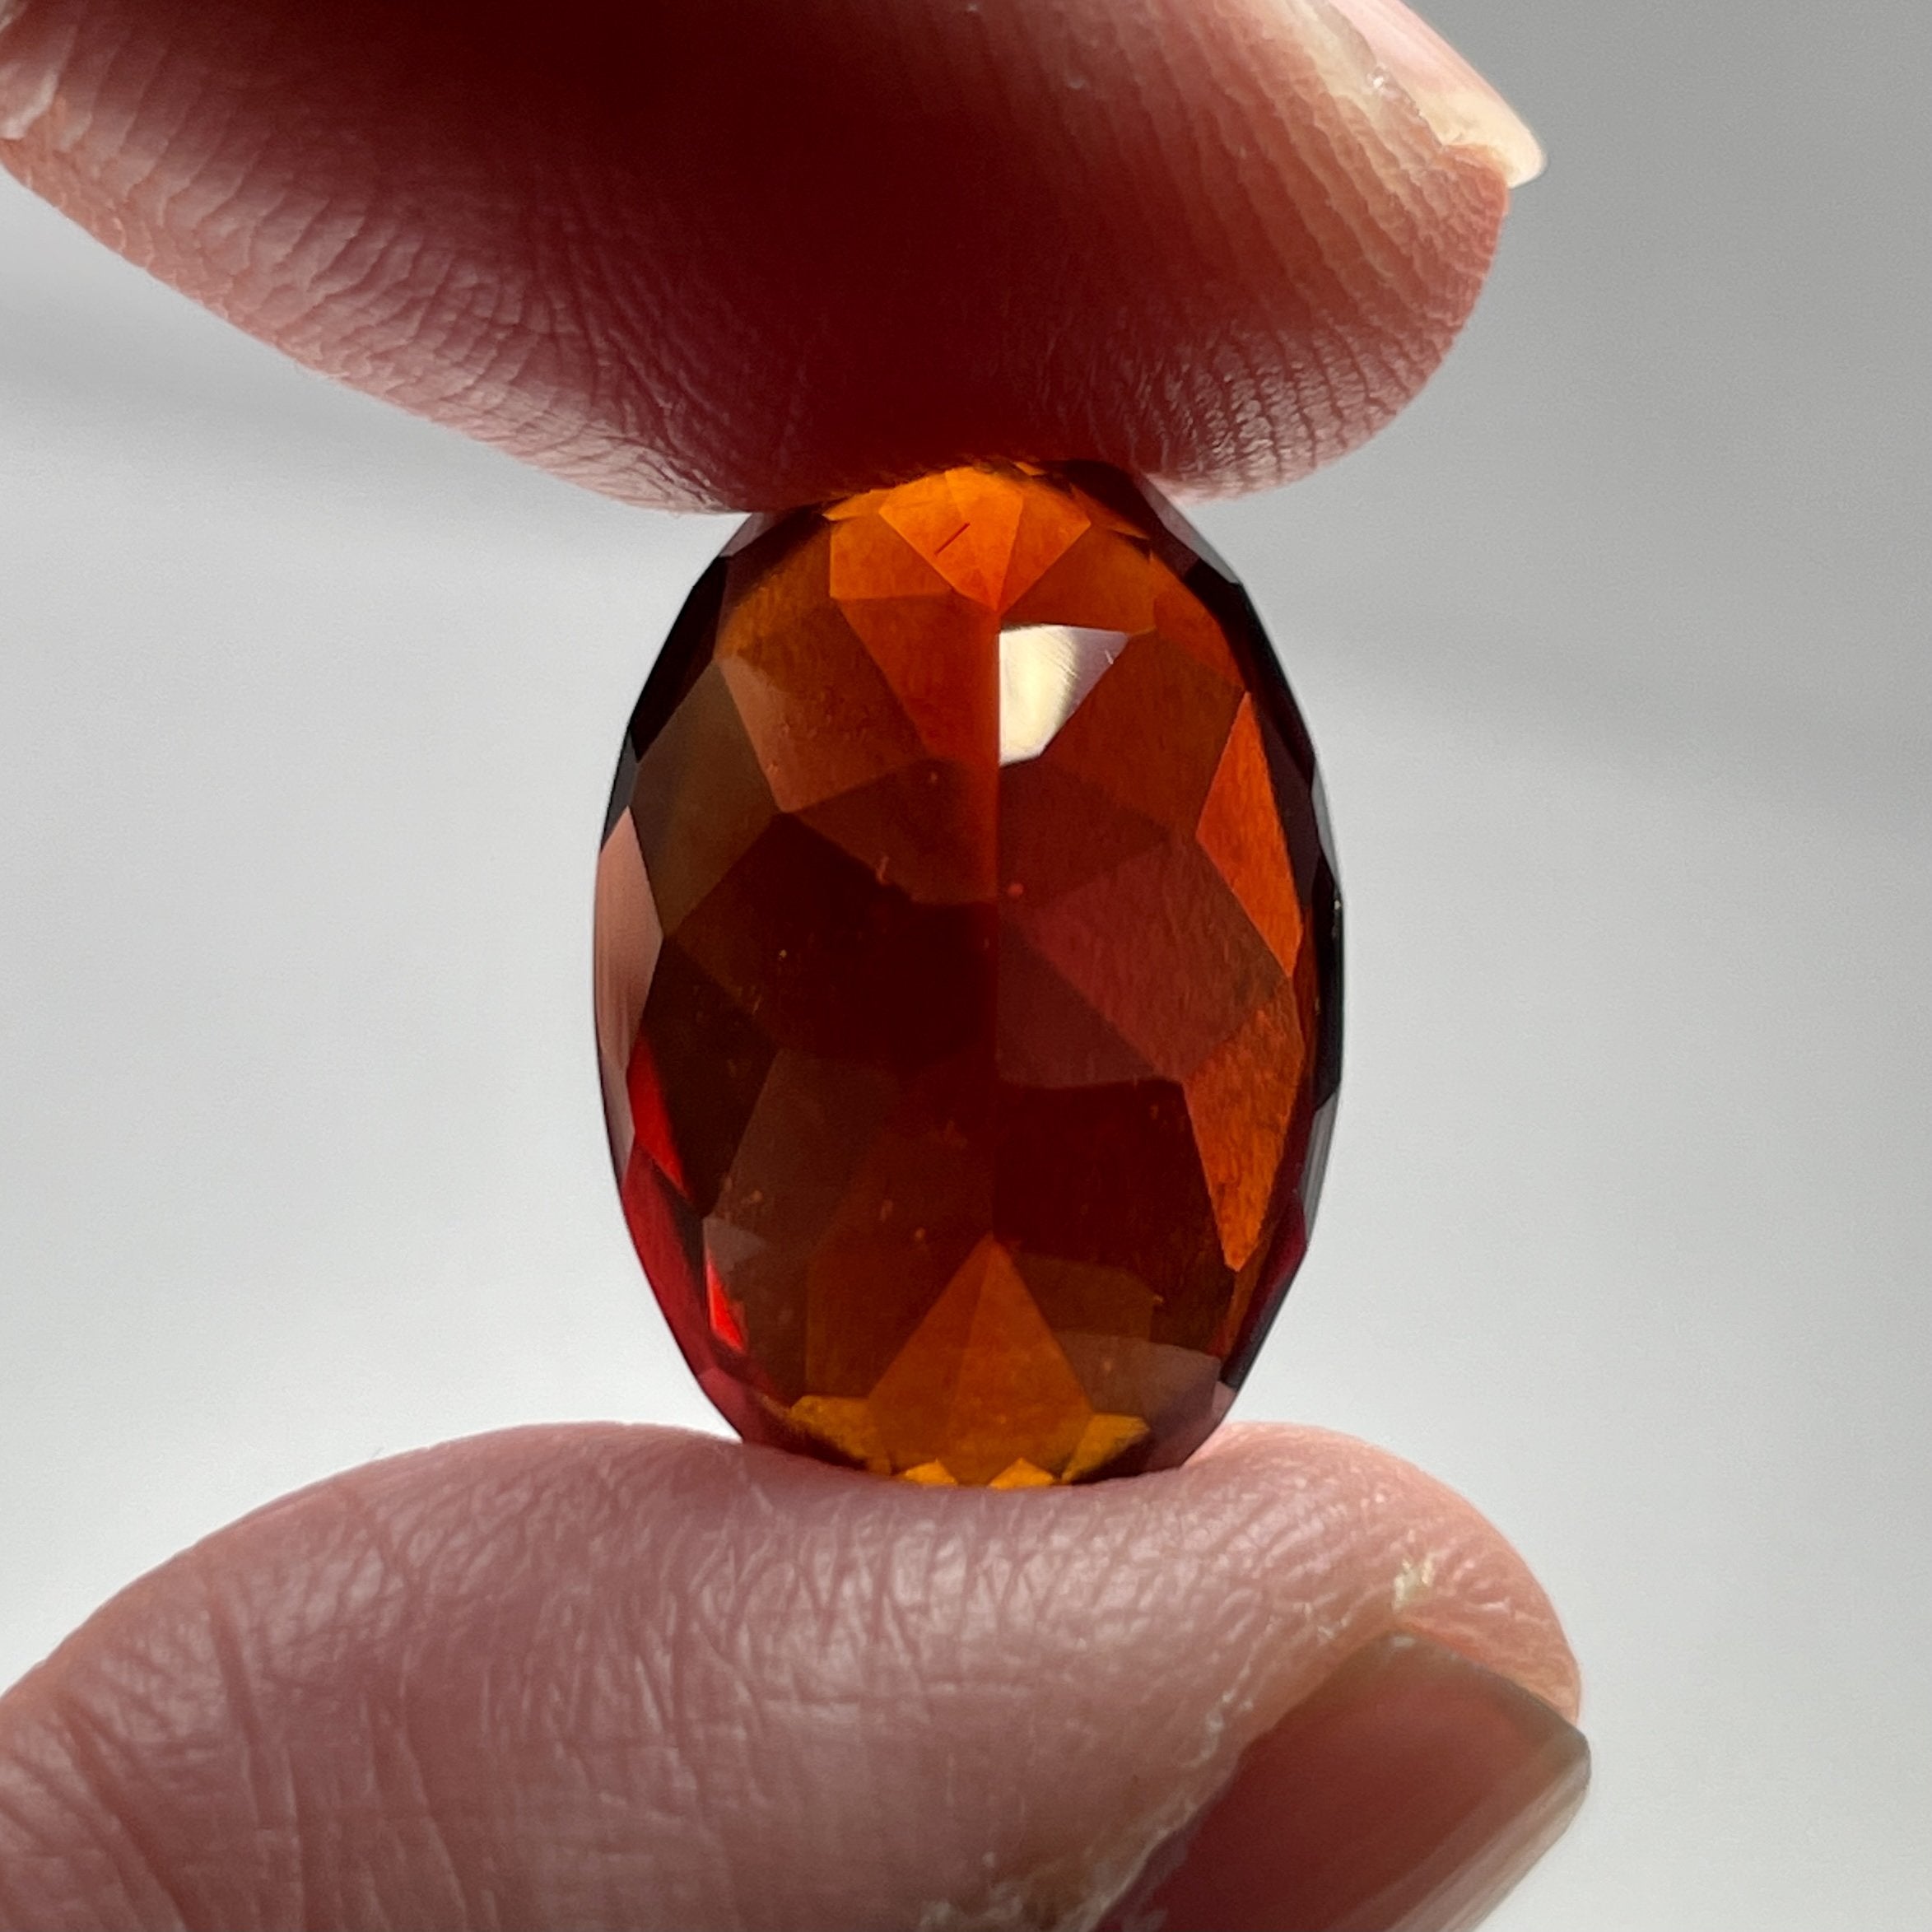 17.07Ct Hessonite Garnet Tanzania Untreated Unheated. 18 X 11.8 8.9 Mm. Use Either Side.